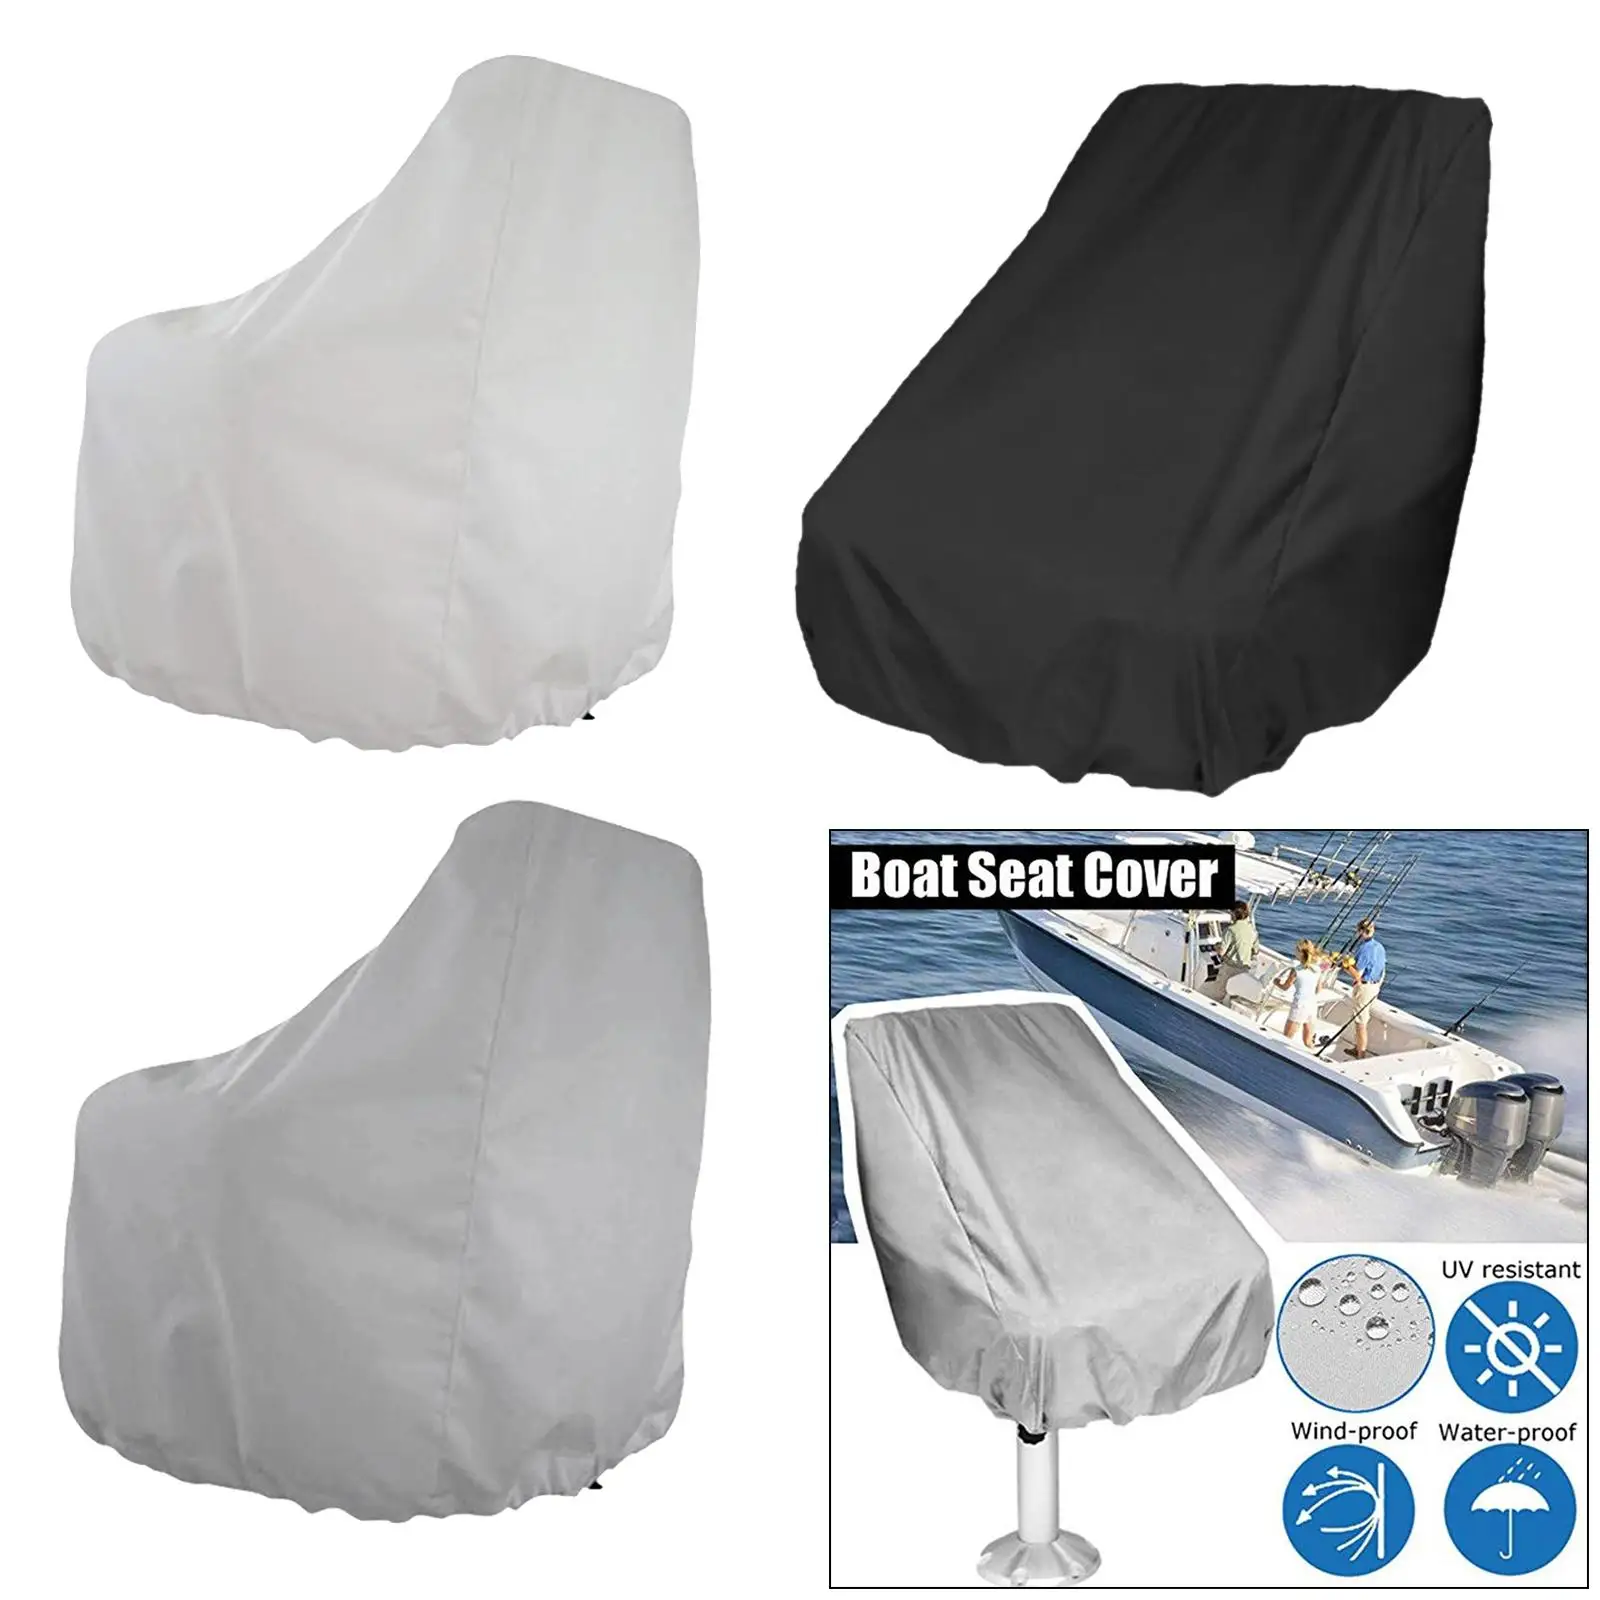 Boat Seat Cover, Oxford Fabric Helm  Protective Cover, Outdoor 210D Waterproof Folding  Boat Bench  Seat Protective Durable